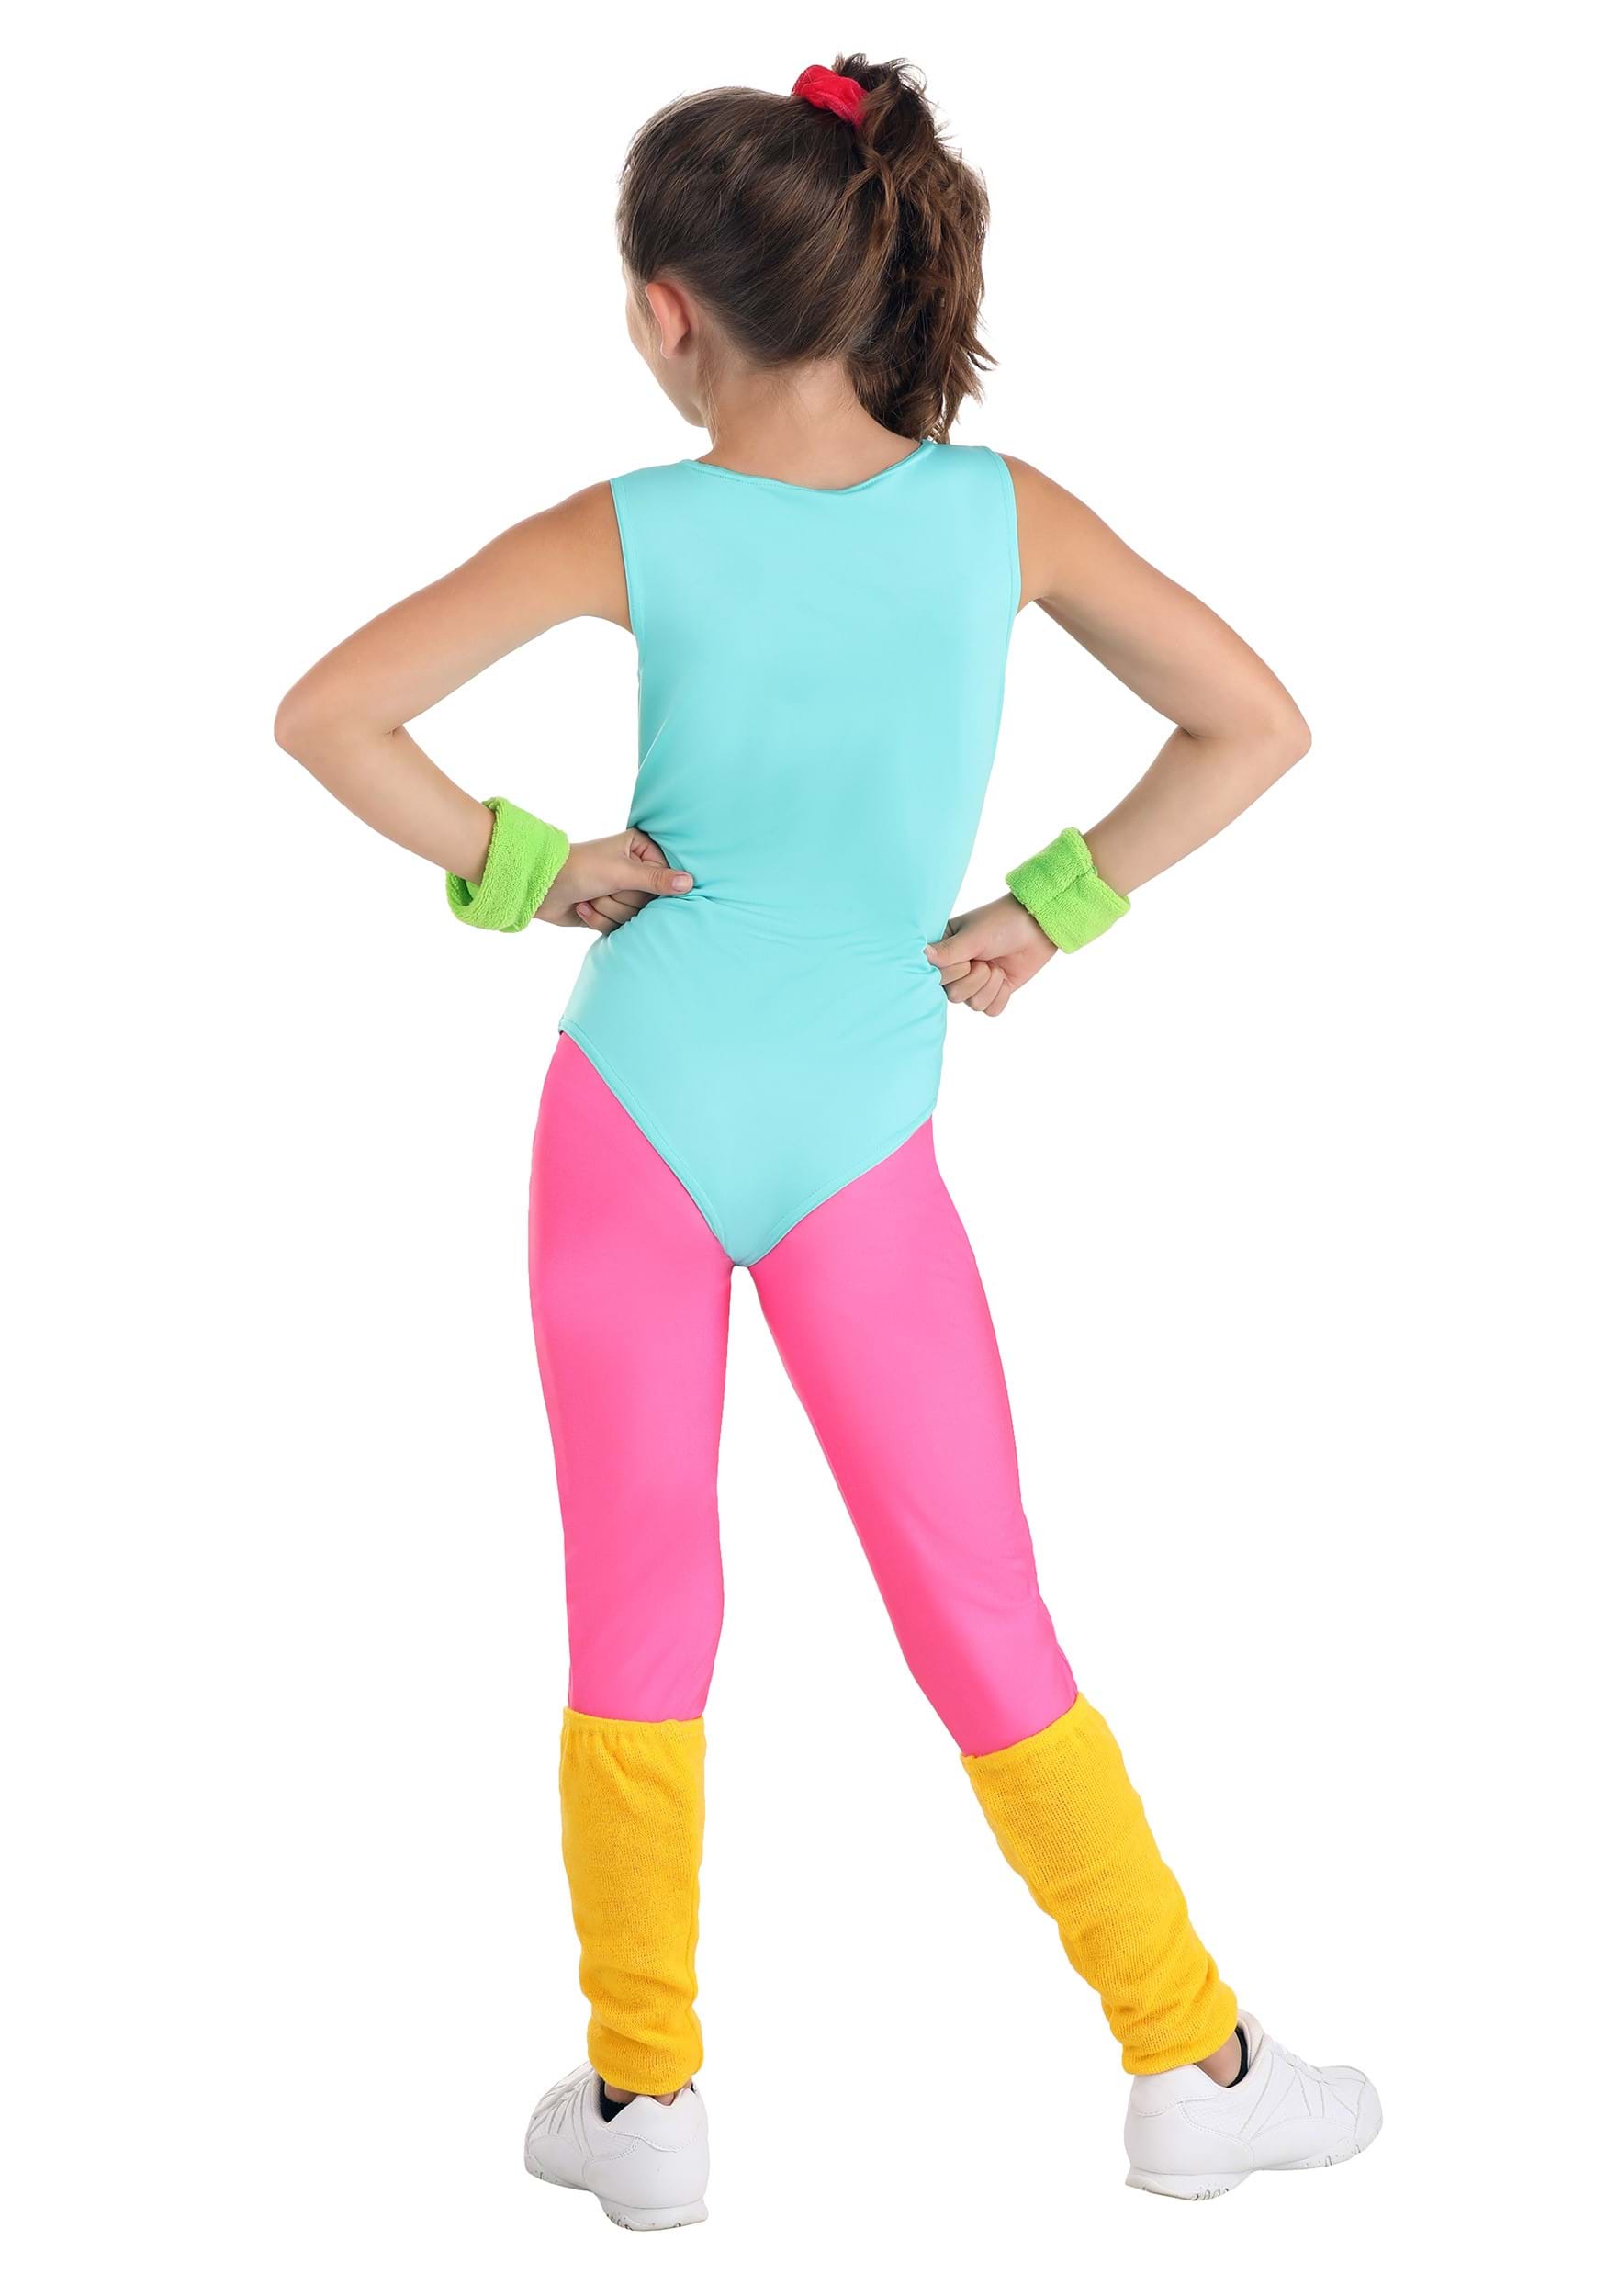 https://images.halloweencostumes.com/products/78154/2-1-219047/totally-80s-workout-costume-for-girls-alt-1.jpg